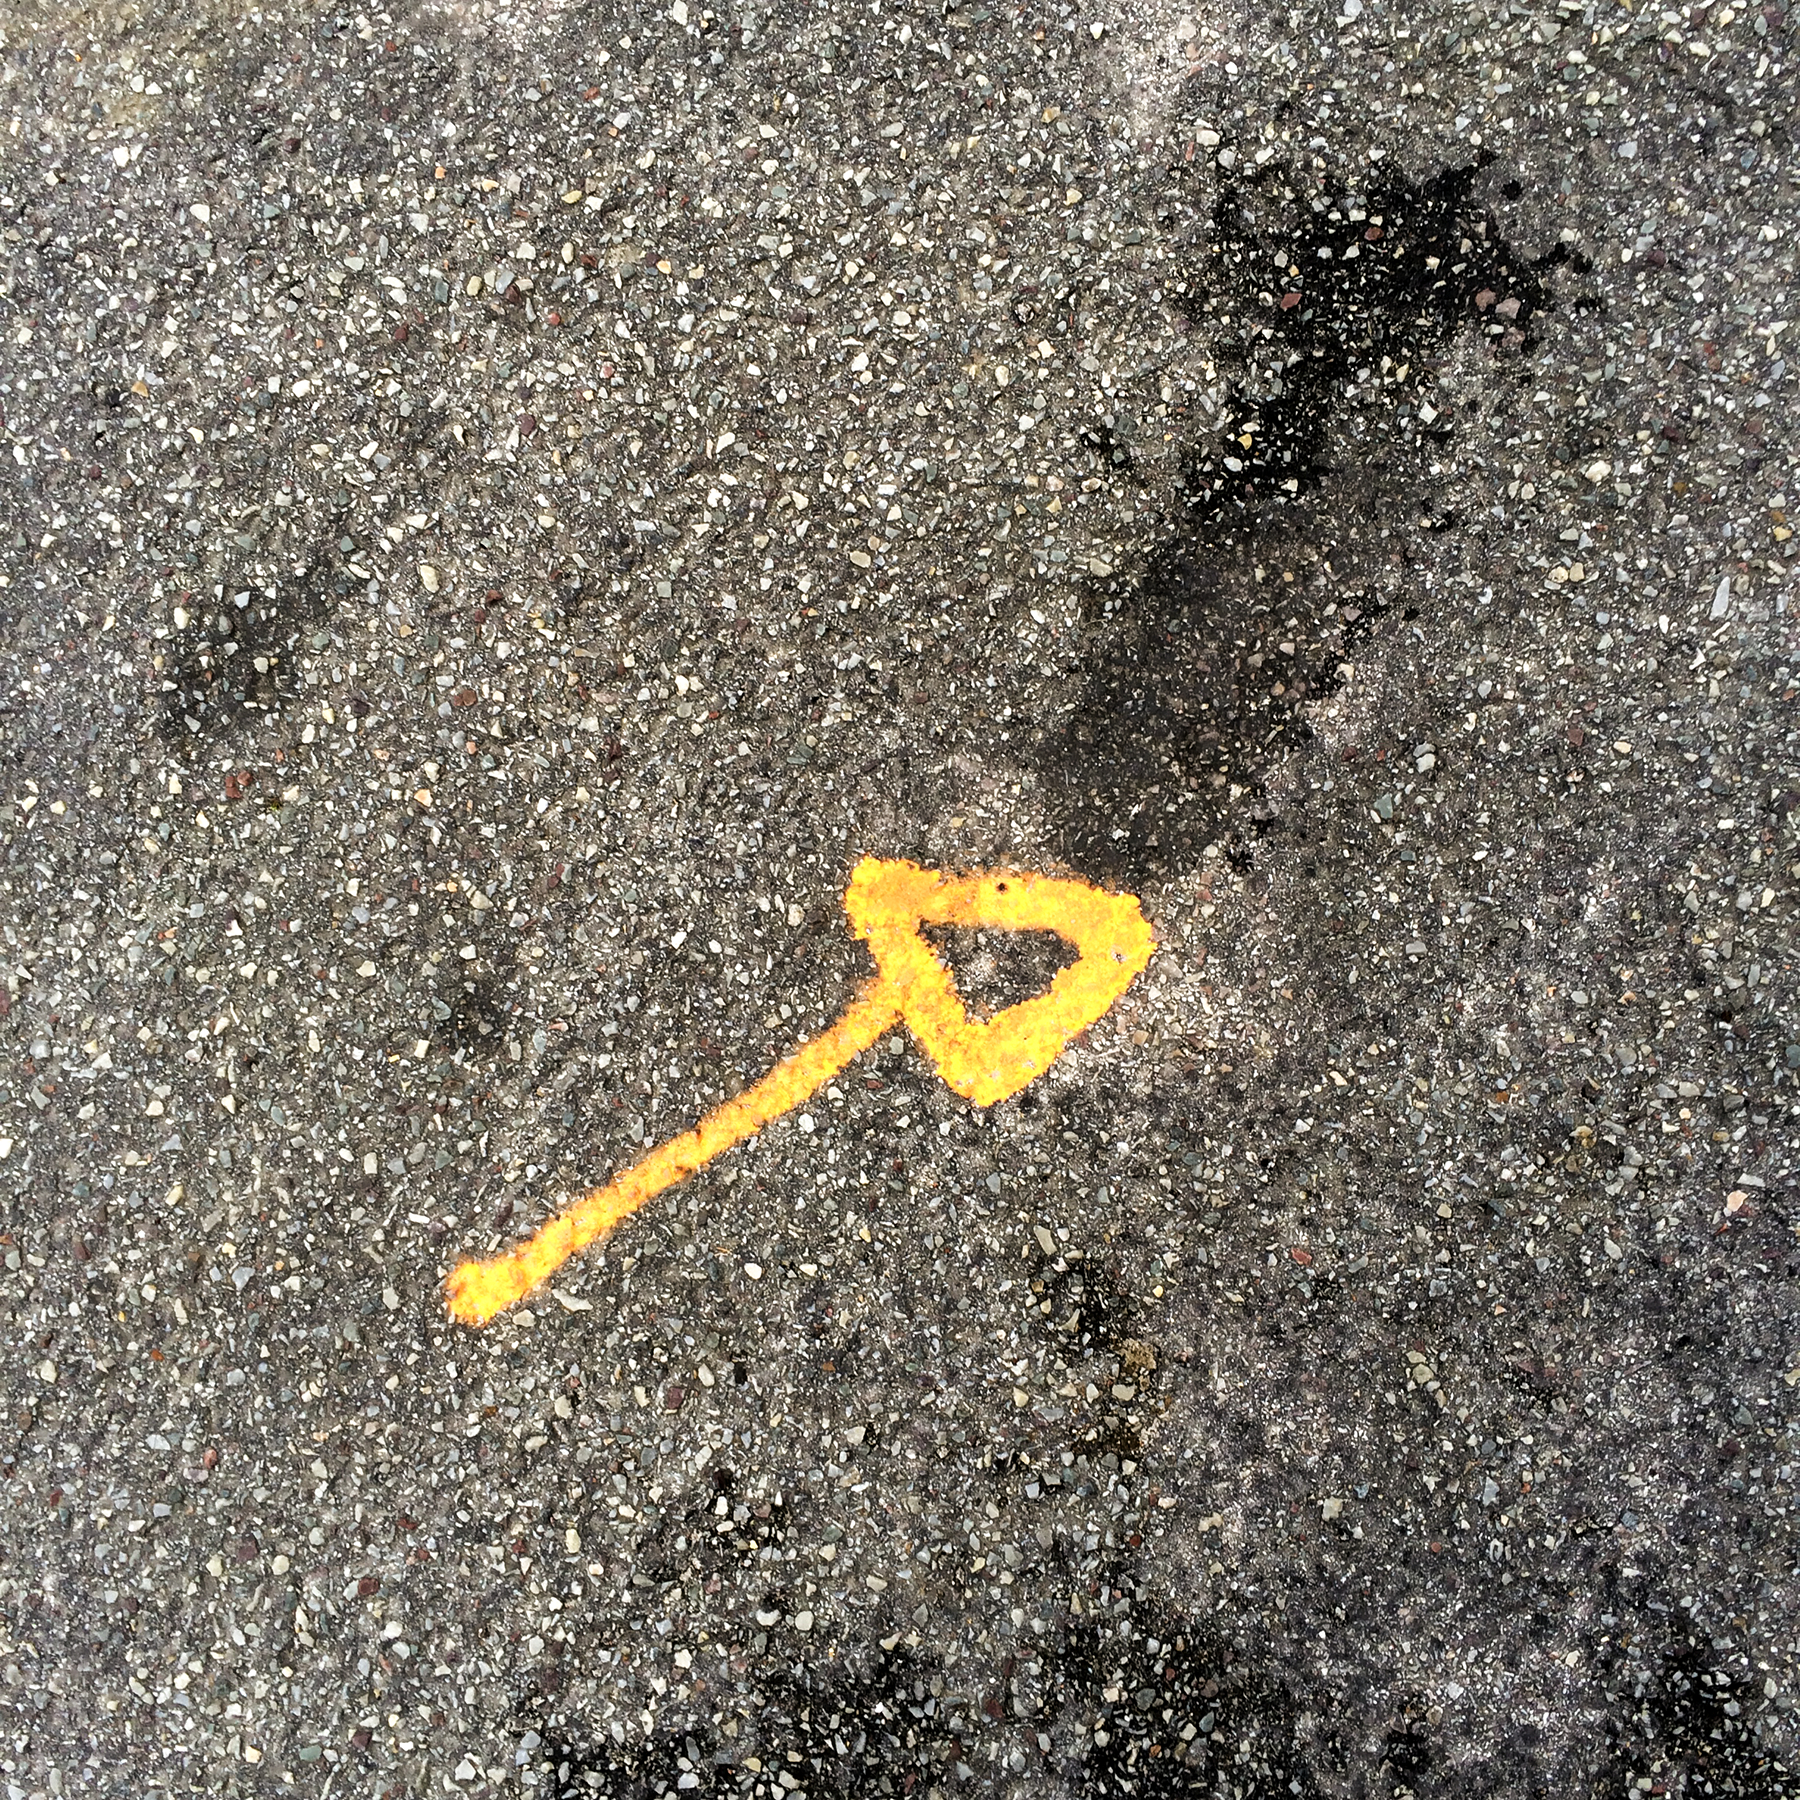 5th of 6 placeholder images: yellow arrow spraypainted on pavement